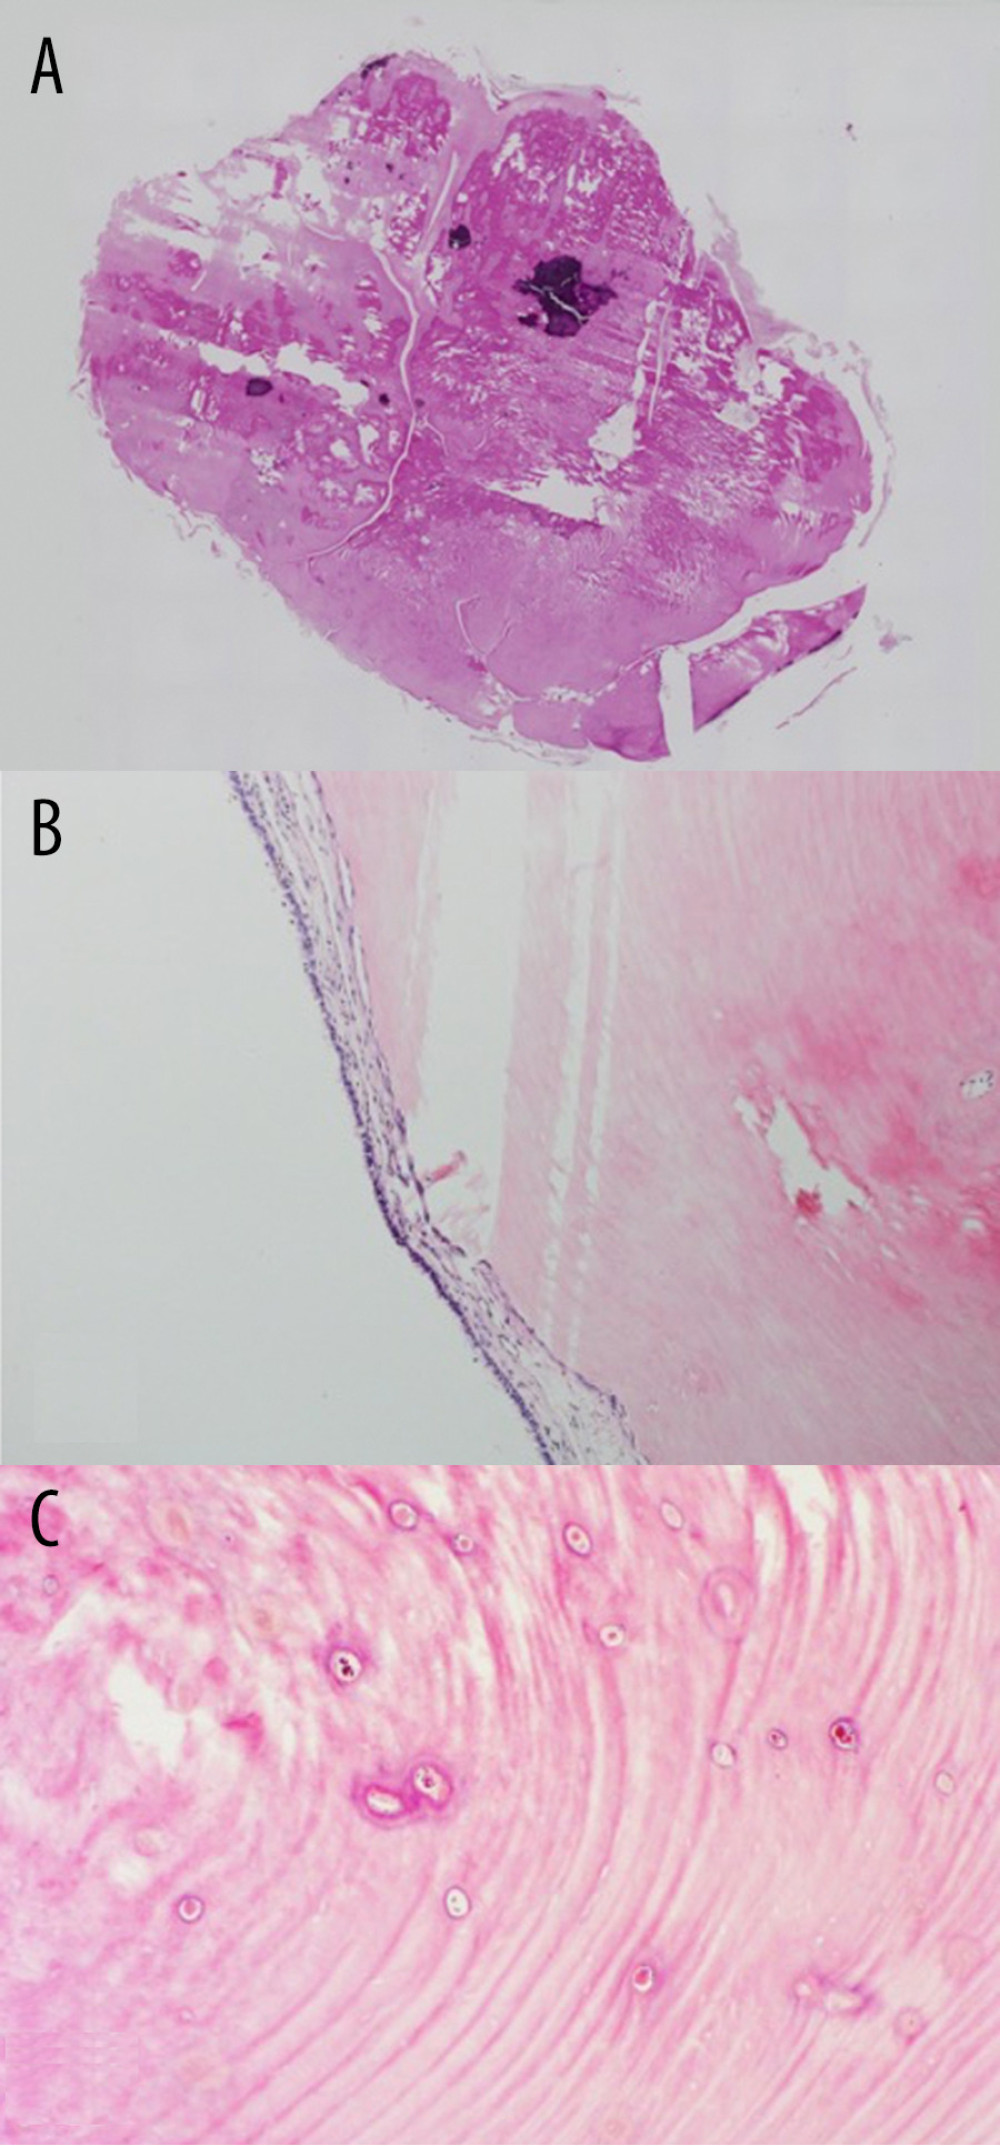 Histopathology with hematoxylin and eosin staining. (A) Loupe image of excised osteoma (reconstructed segmented section). (B) Low magnification (×40). Atrophic maxillary sinus mucosa can be seen on the osteoma surface. (C) High magnification (×200). Dense osteoma composed of dense laminar plate bone with poor bone marrow cavity.